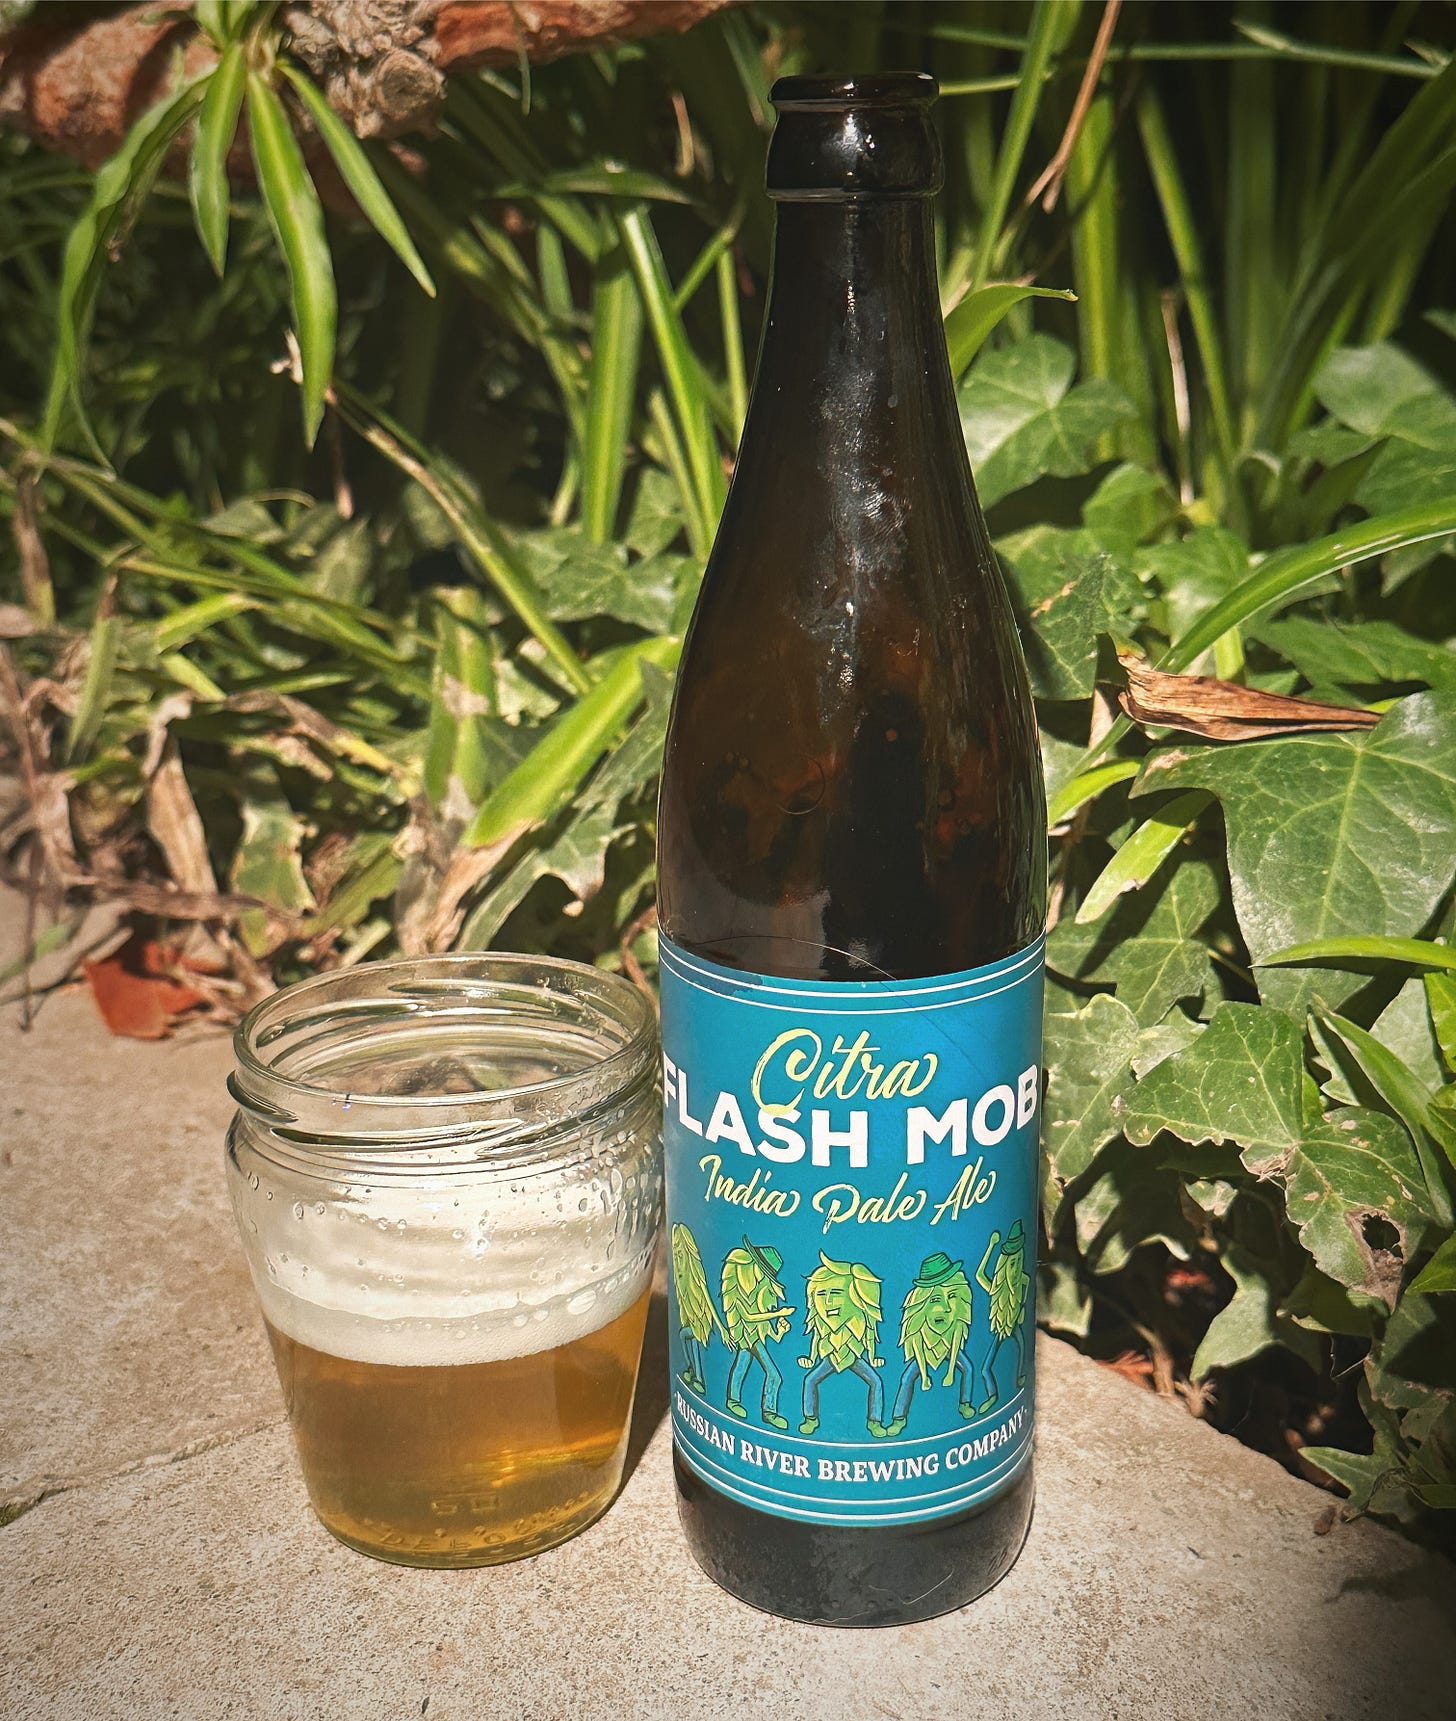 A glass full of Citra Flash Mob IPA next to the bottle. Plants in the background of the picture.